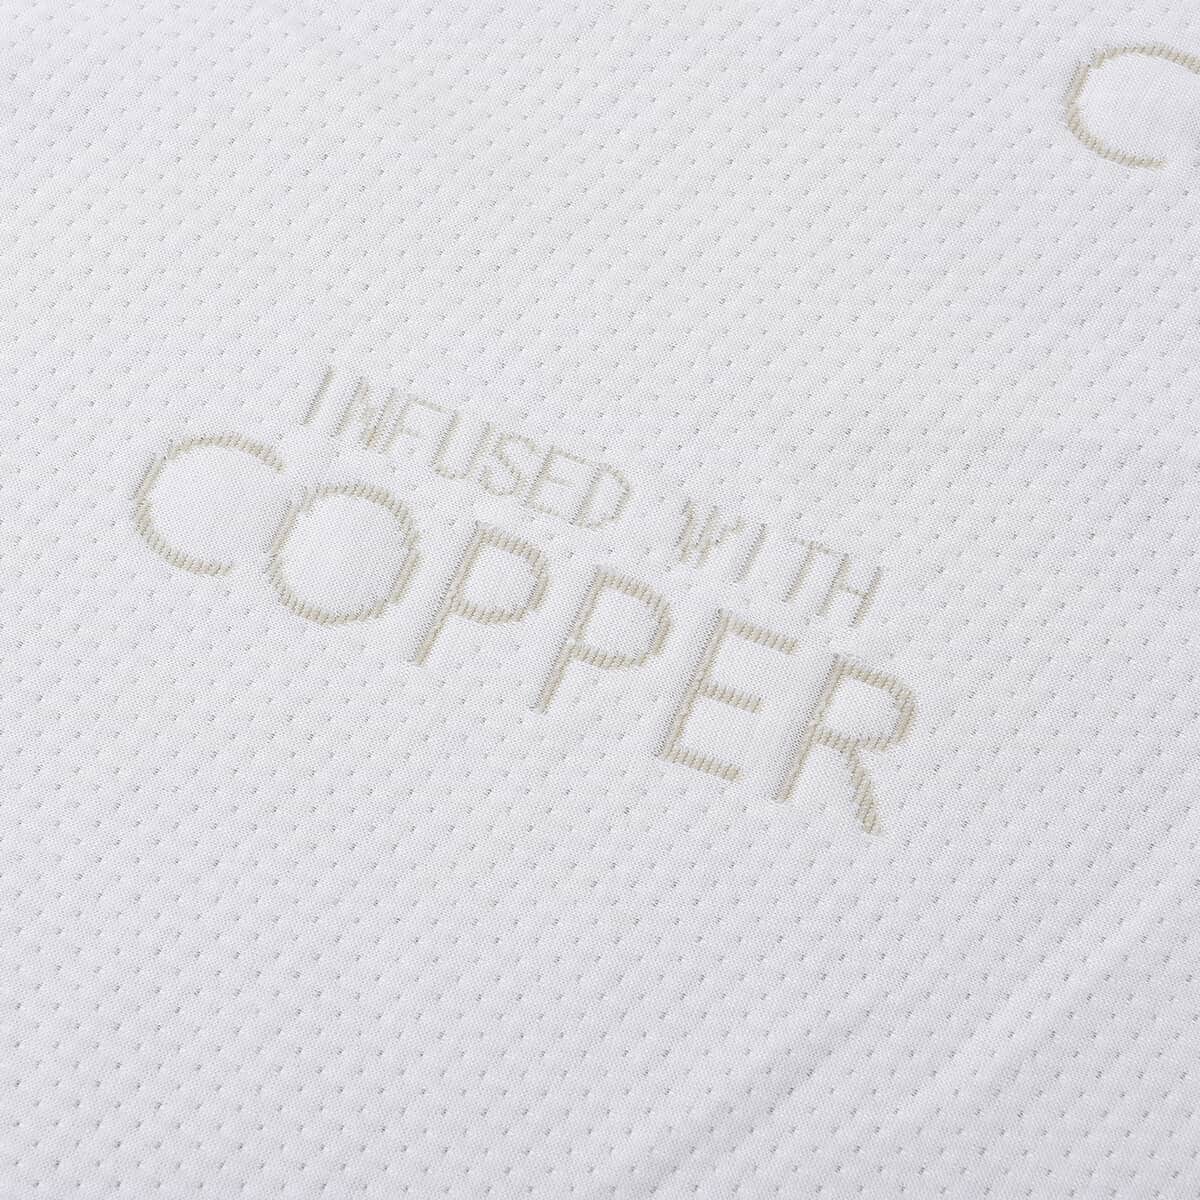 Homesmart Copper Infused Jacquard Mattress Protector Cover Queen Size image number 2